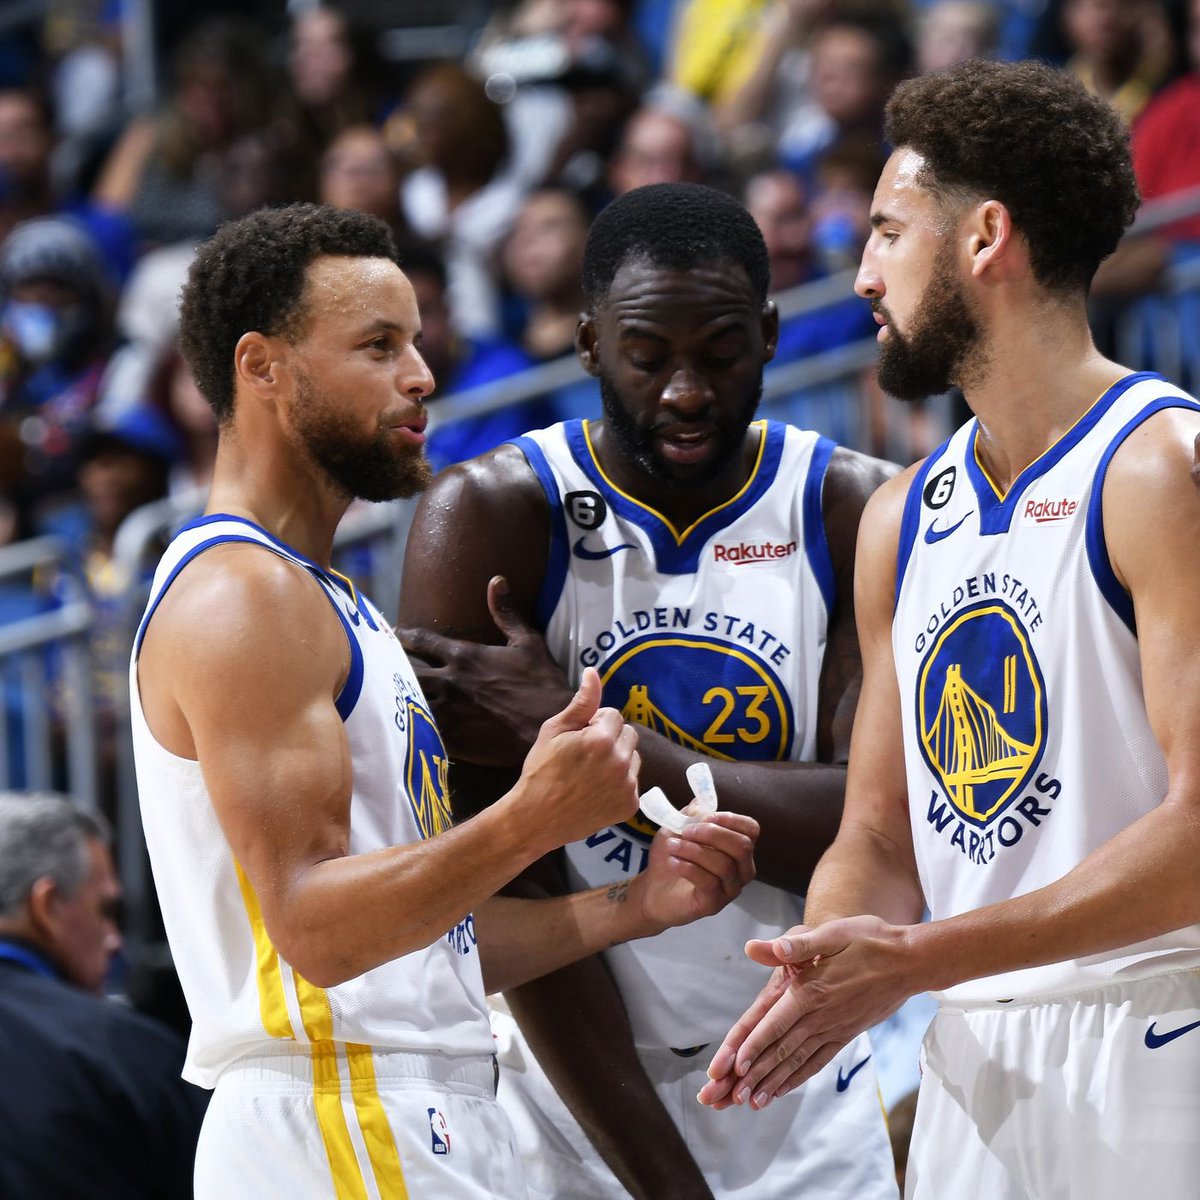 Dynasty ain't over as long as these 3 are together... #DubNation